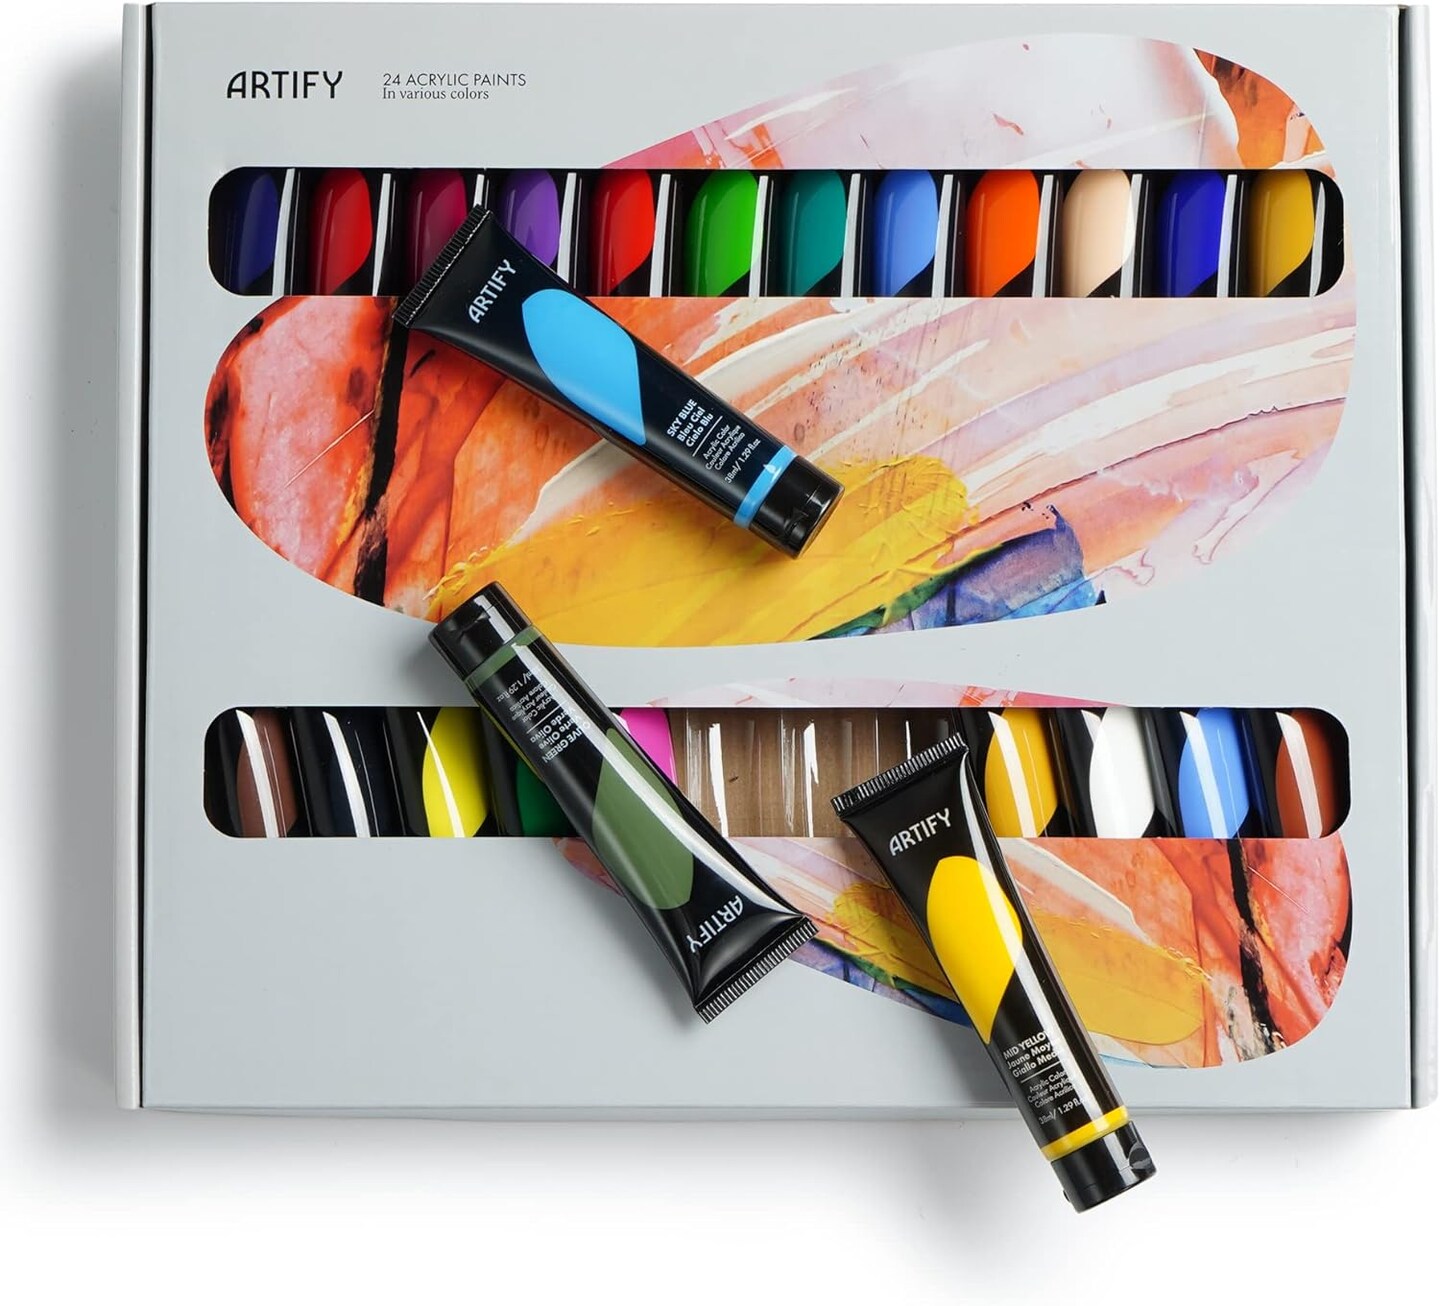 ARTIFY Acrylic Paint, Set Of 24 Color (1.29 oz, 38ml) with a storage box, Rich Pigments, Non Fading, Non Toxic Paints for Artist, Hobby Painters &#x26; Kids, Art Supplies for Canvas Painting